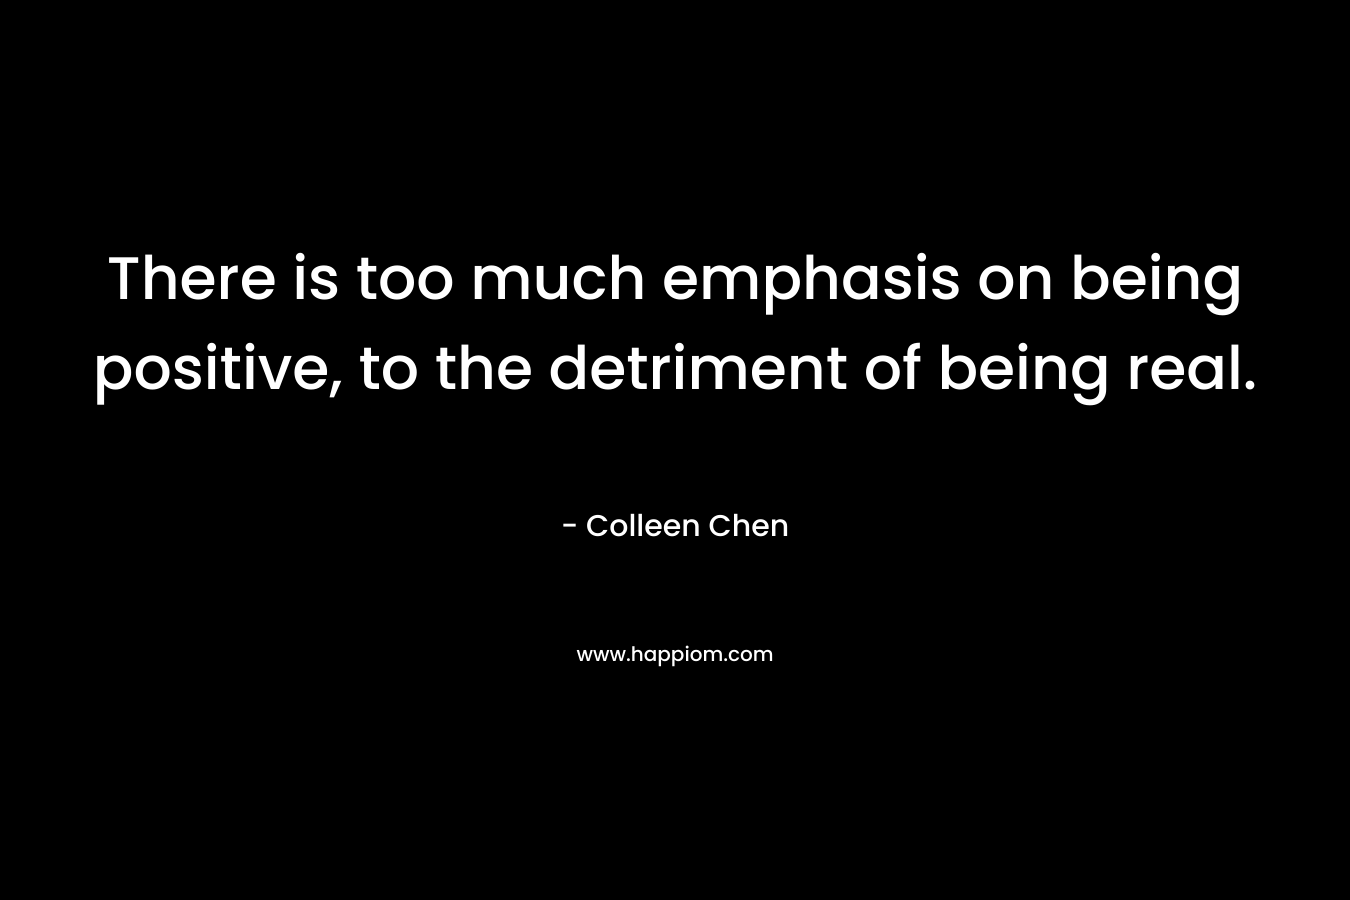 There is too much emphasis on being positive, to the detriment of being real. – Colleen Chen